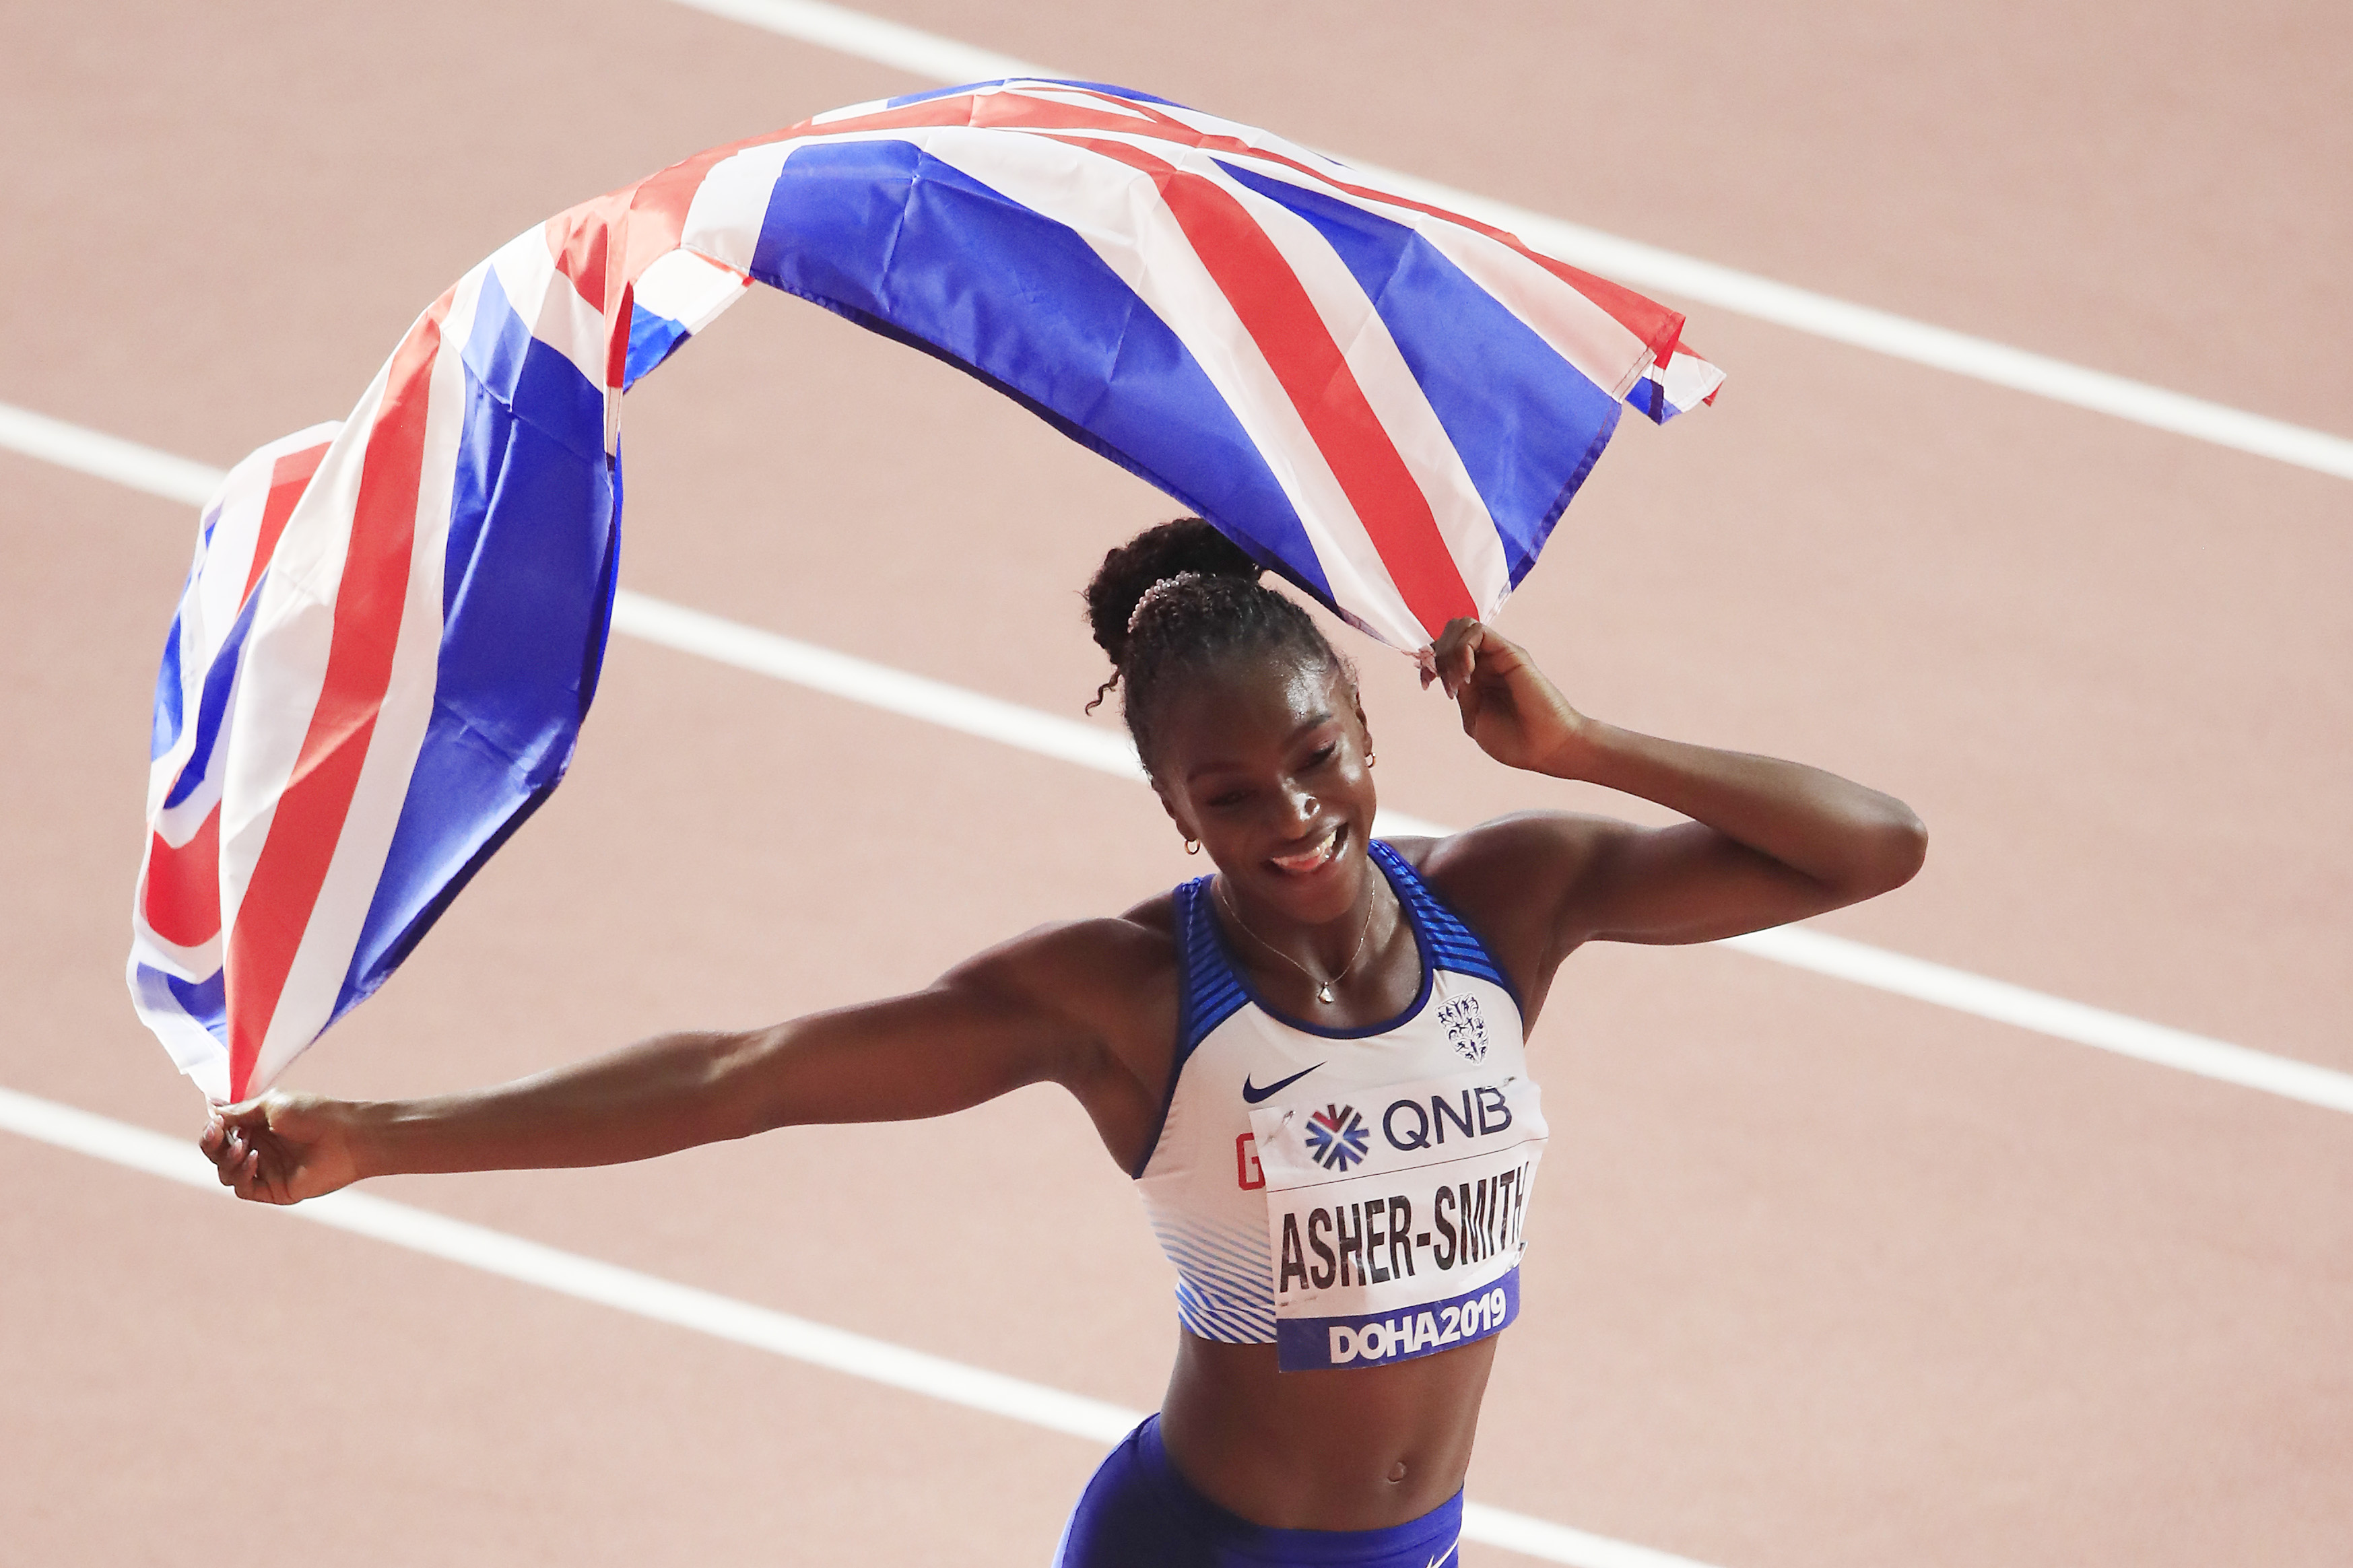 Asher-Smith “relieved” by Tokyo 2020 postponement